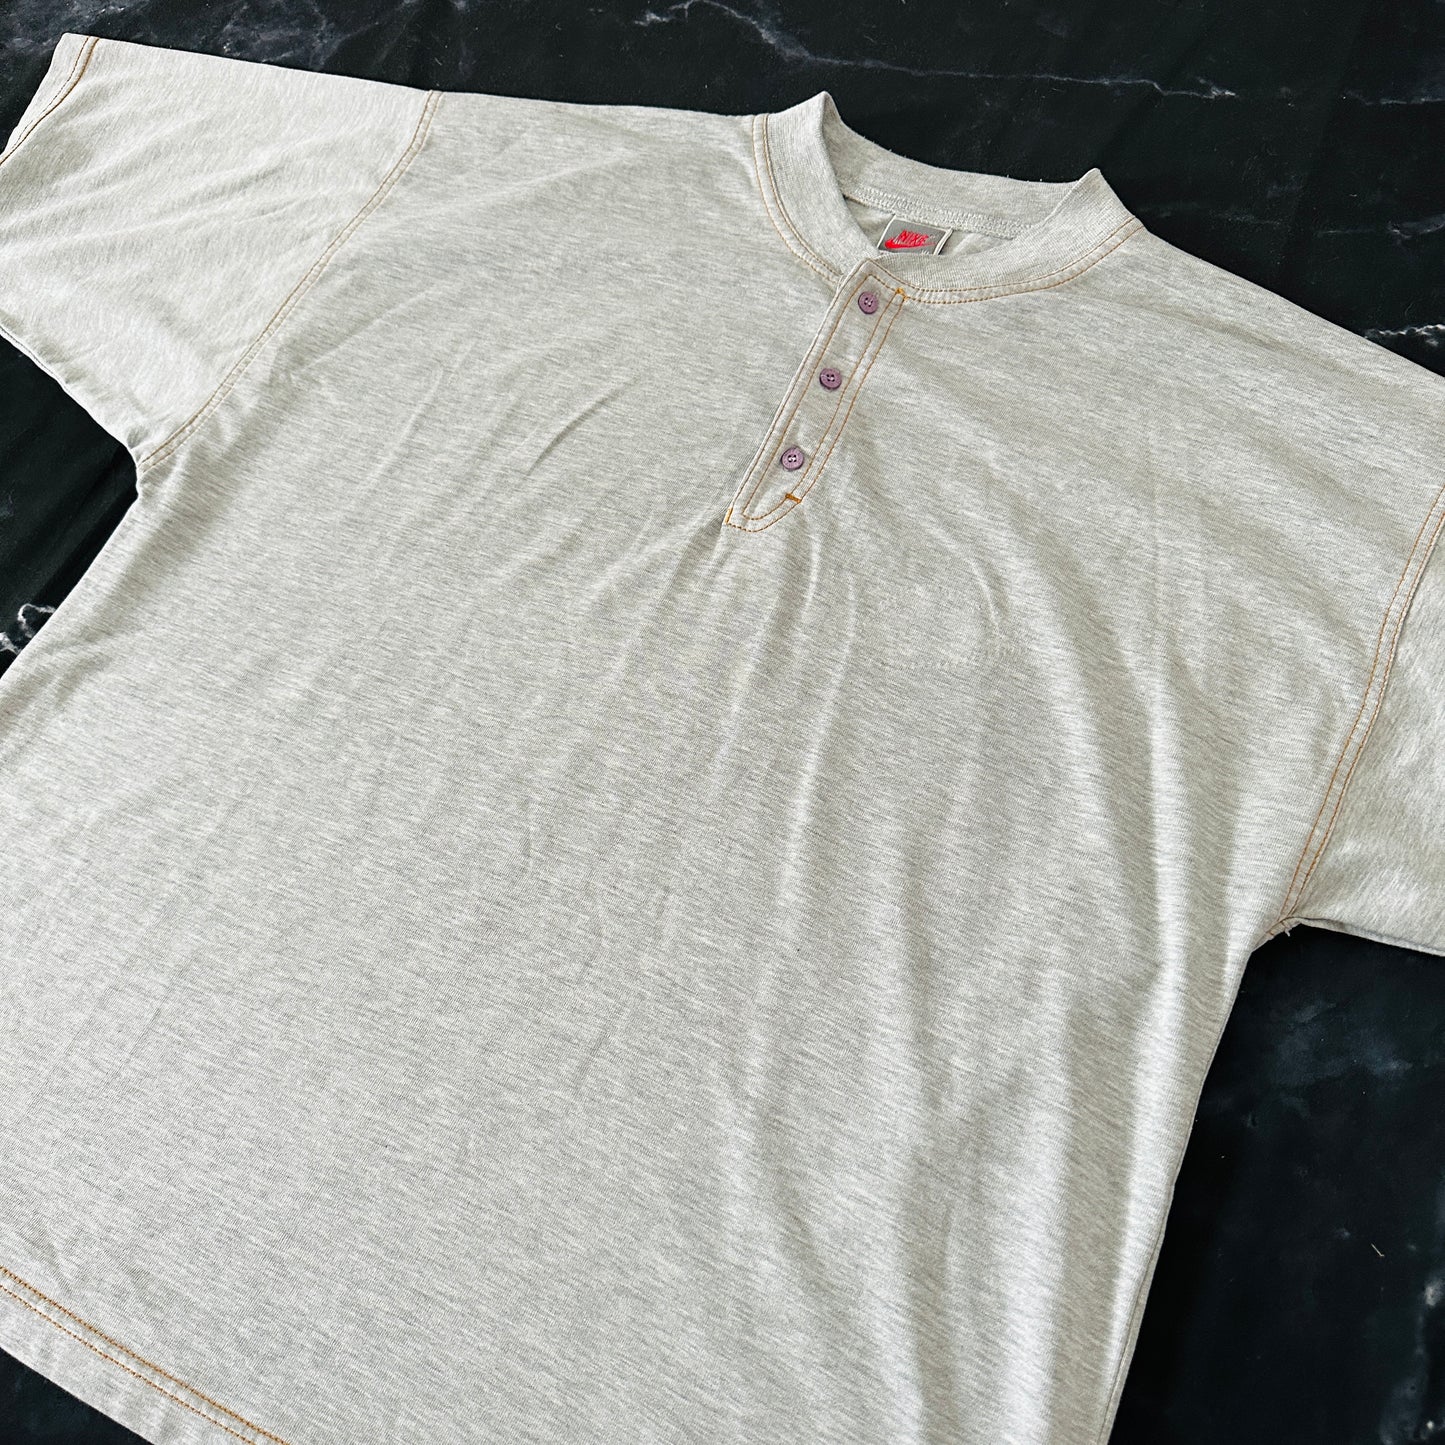 Nike Vintage 80s Henley T-Shirt - XL - Made in Portugal